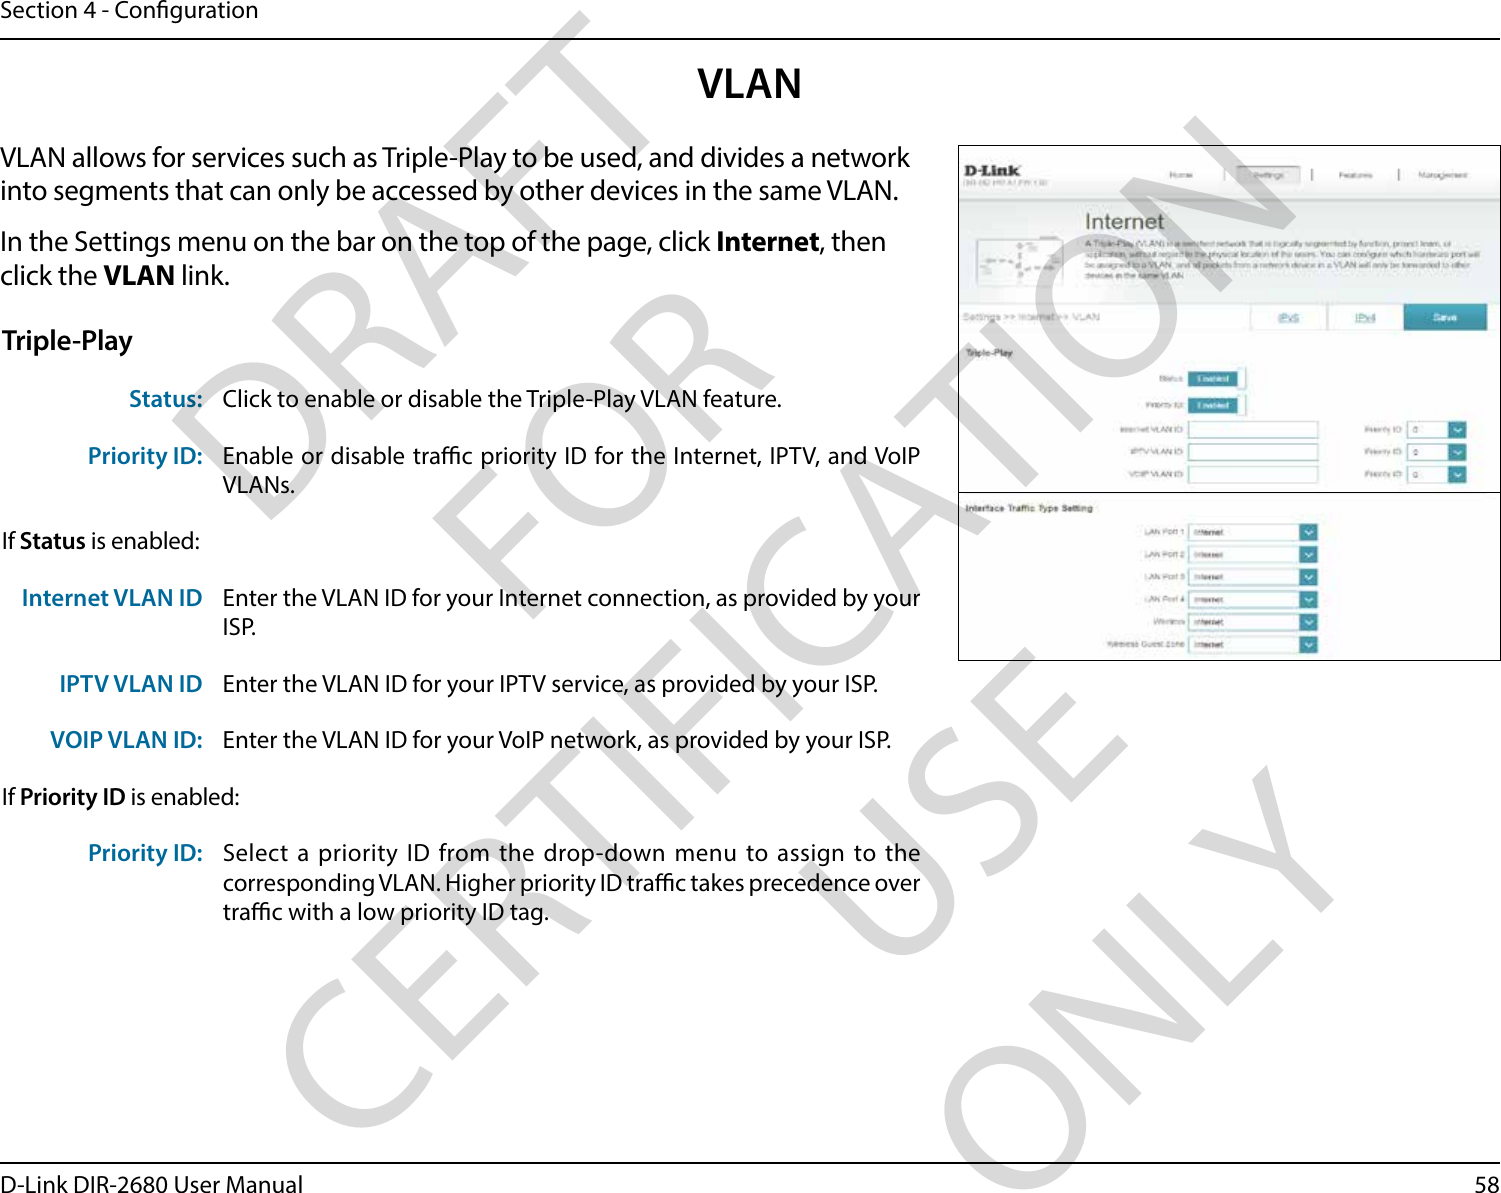 58D-Link DIR-2680 User ManualSection 4 - CongurationVLANVLAN allows for services such as Triple-Play to be used, and divides a network into segments that can only be accessed by other devices in the same VLAN.In the Settings menu on the bar on the top of the page, click Internet, then click the VLAN link. Triple-PlayStatus: Click to enable or disable the Triple-Play VLAN feature. Priority ID: Enable or disable trac priority ID for the Internet, IPTV, and VoIP VLANs. If Status is enabled:Internet VLAN ID Enter the VLAN ID for your Internet connection, as provided by your ISP.IPTV VLAN ID Enter the VLAN ID for your IPTV service, as provided by your ISP. VOIP VLAN ID: Enter the VLAN ID for your VoIP network, as provided by your ISP. If Priority ID is enabled:Priority ID: Select a priority ID from the drop-down menu to assign to the corresponding VLAN. Higher priority ID trac takes precedence over trac with a low priority ID tag.DRAFT FOR CERTIFICATION USE ONLY